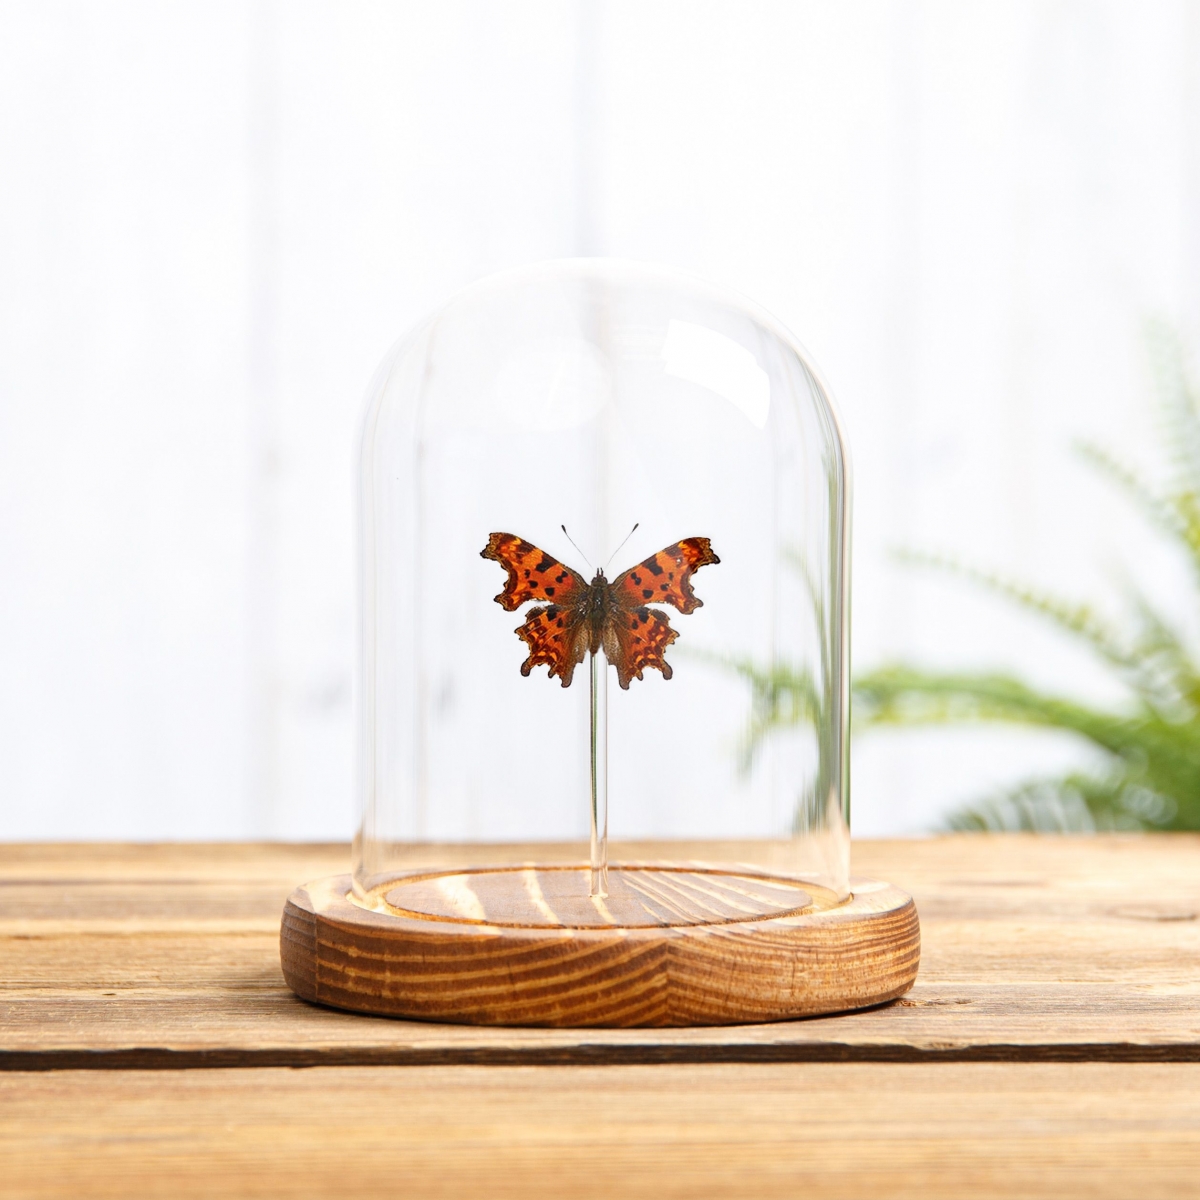 The Comma Butterfly in Glass Dome with Wooden Base (Polygonia c-album)